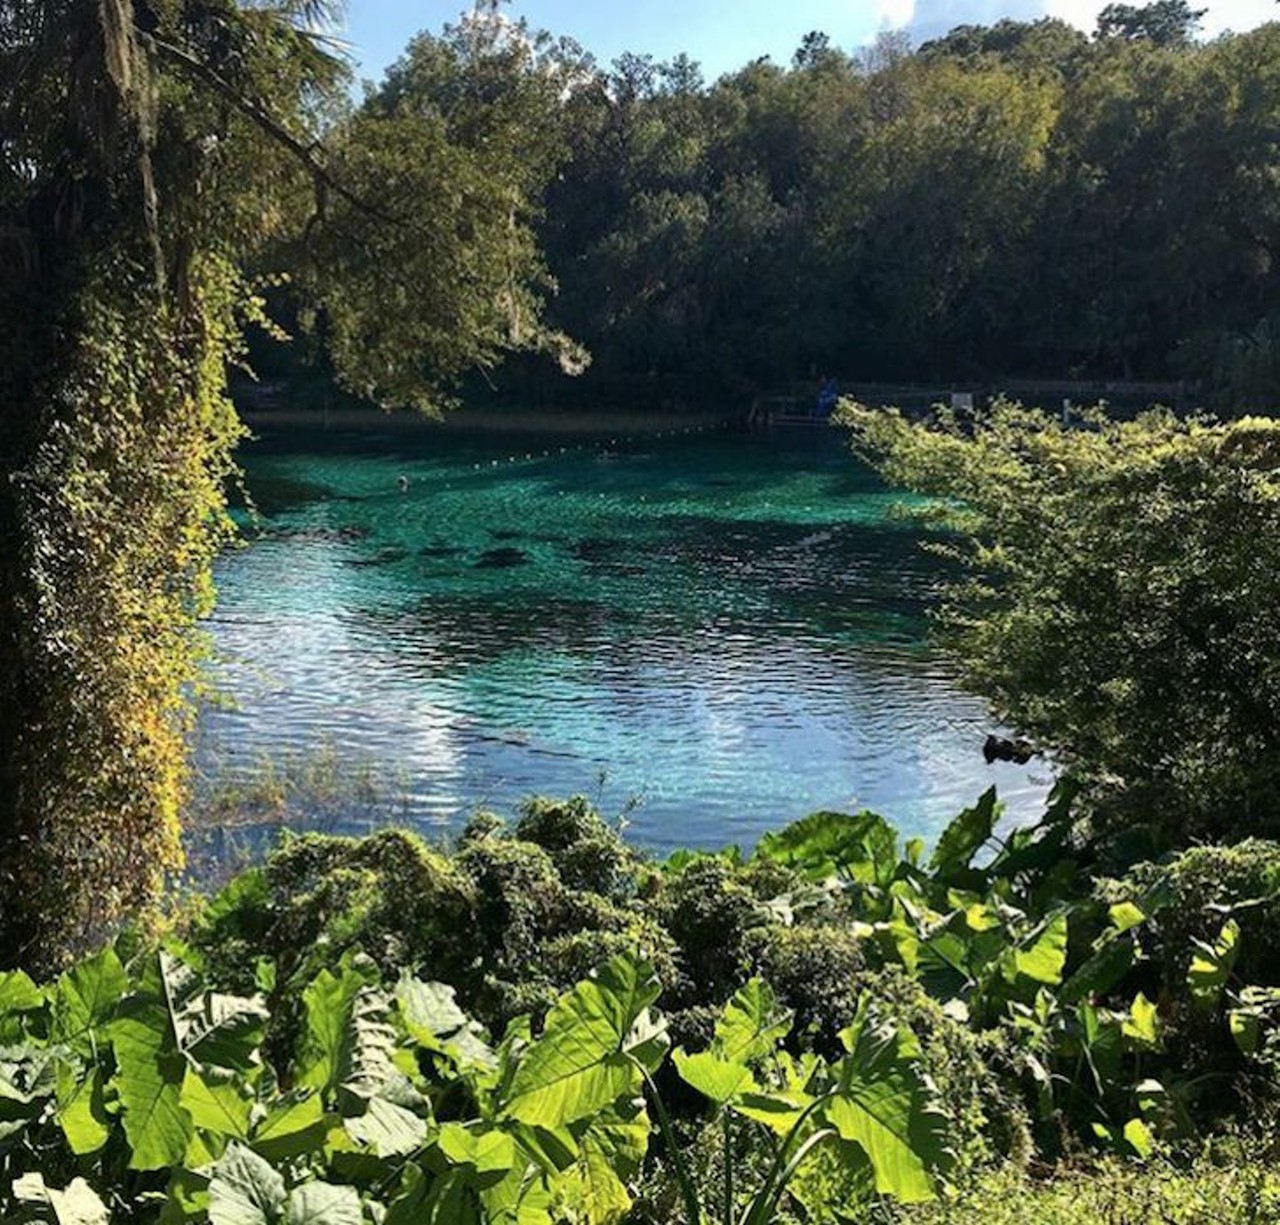 Rainbow Springs State Park 
Crystal River
As Florida&#146;s fourth largest spring, with use dating back 10,000 years ago, Rainbow Springs is a popular spot for swimming, snorkeling, canoeing and kayaking. Tubing is another fun activity you can enjoy on the beautifully clear water. The cooler weather allows you to take advantage of the site&#146;s campgrounds and pavilions for outdoor grilling. 
Photo via home_homeontheroad/Instagram